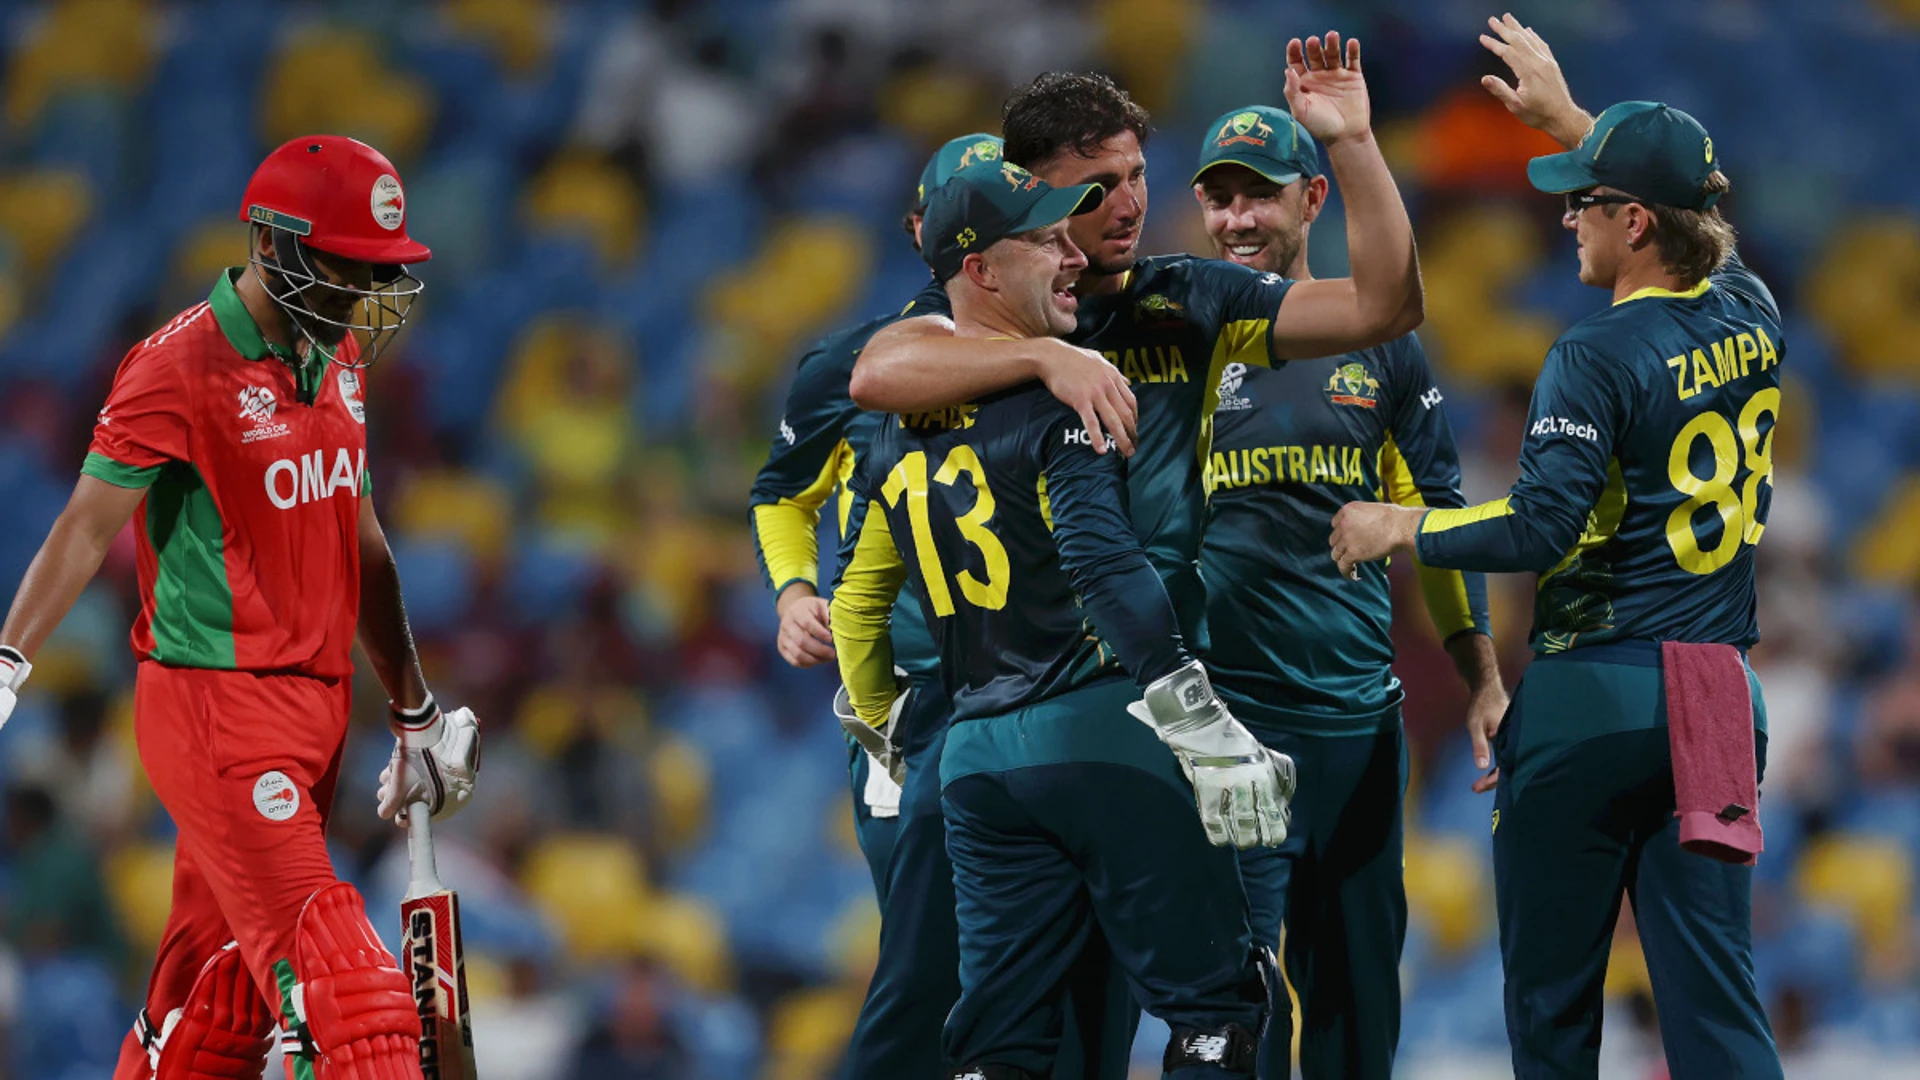 Stoinis shines as Australia cruise past Oman in T20 opener